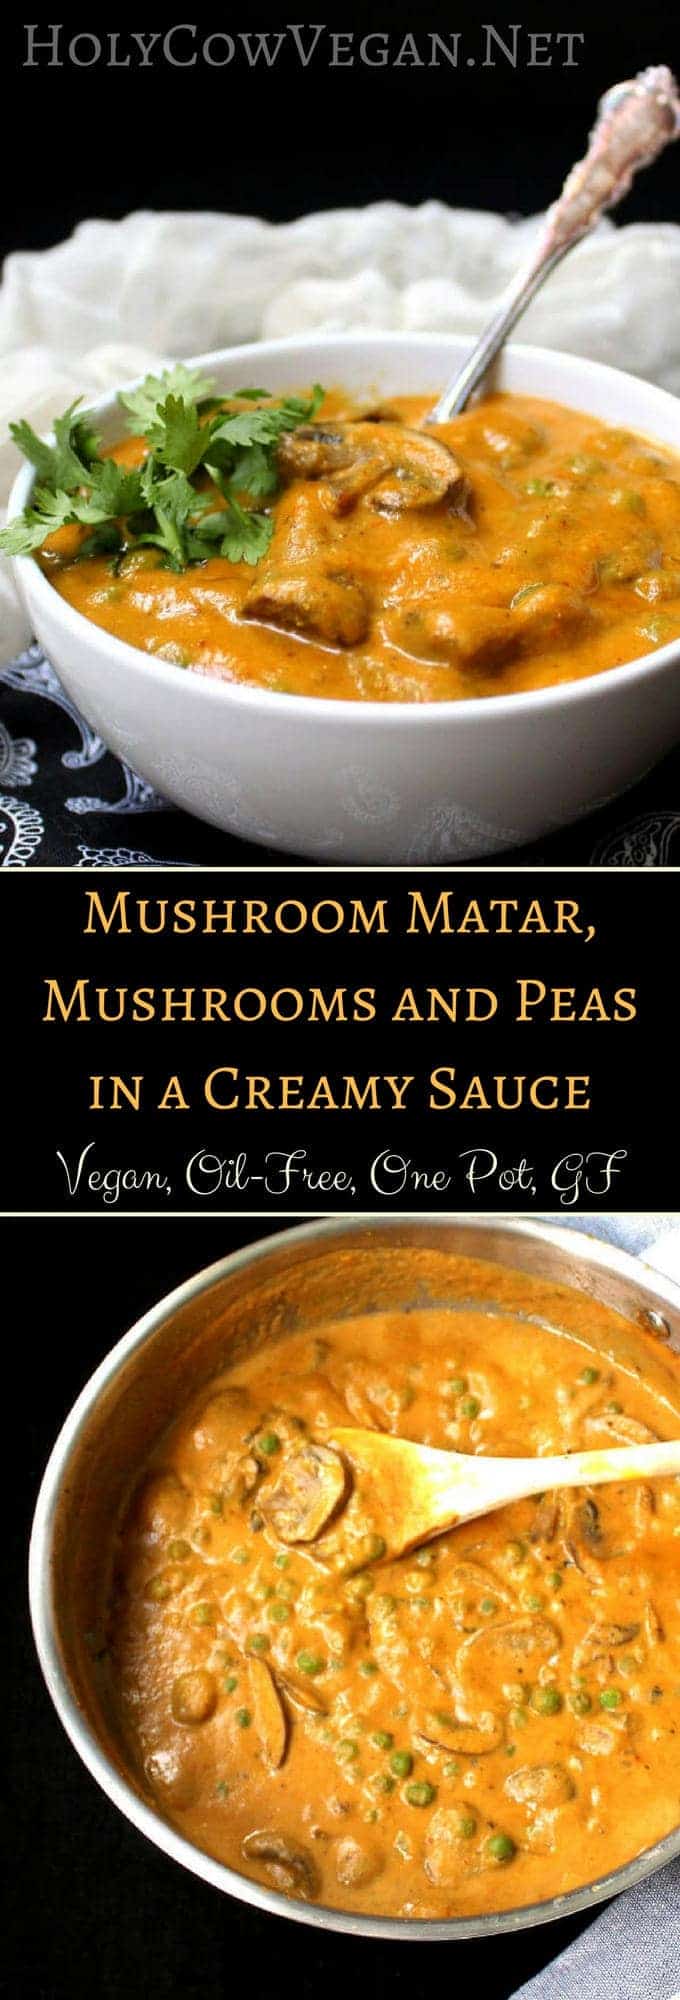 Pin image with photos of mushroom matar and text inlay that says "Mushroom Matar. Mushroom and Peas in a Creamy Sauce, vegan, oil-free, one-pot, gf"